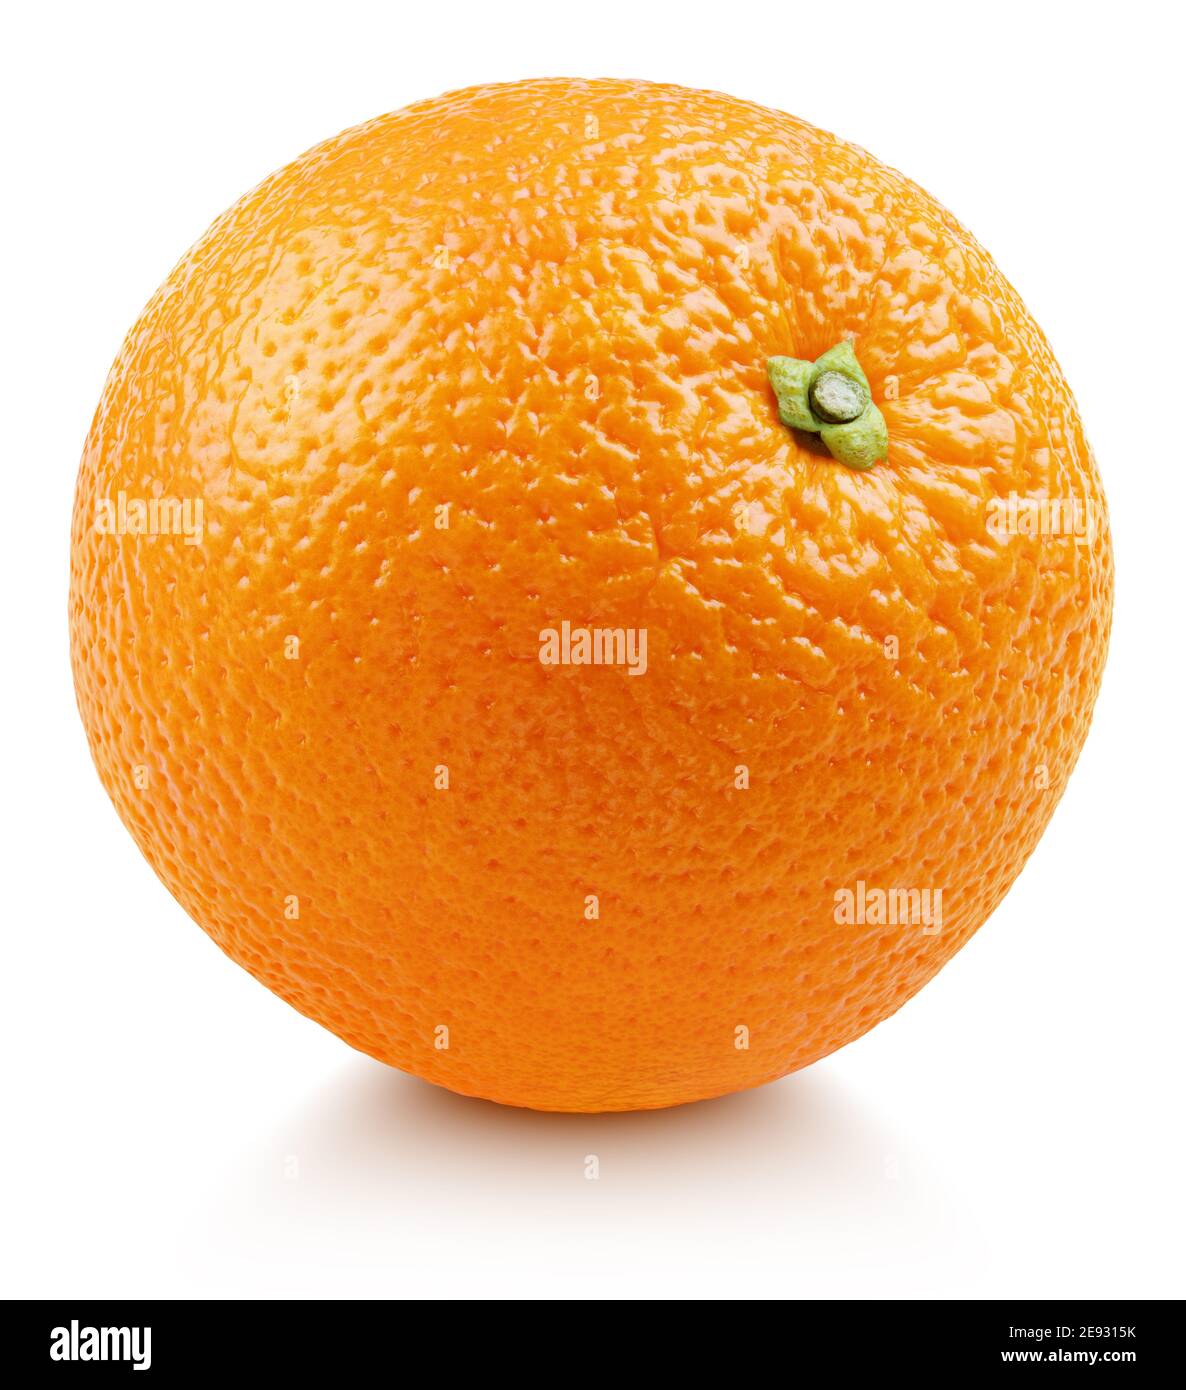 Single ripe whole orange citrus fruit with shadow isolated on white background. Full orange with clipping path. Full depth of field. Stock Photo